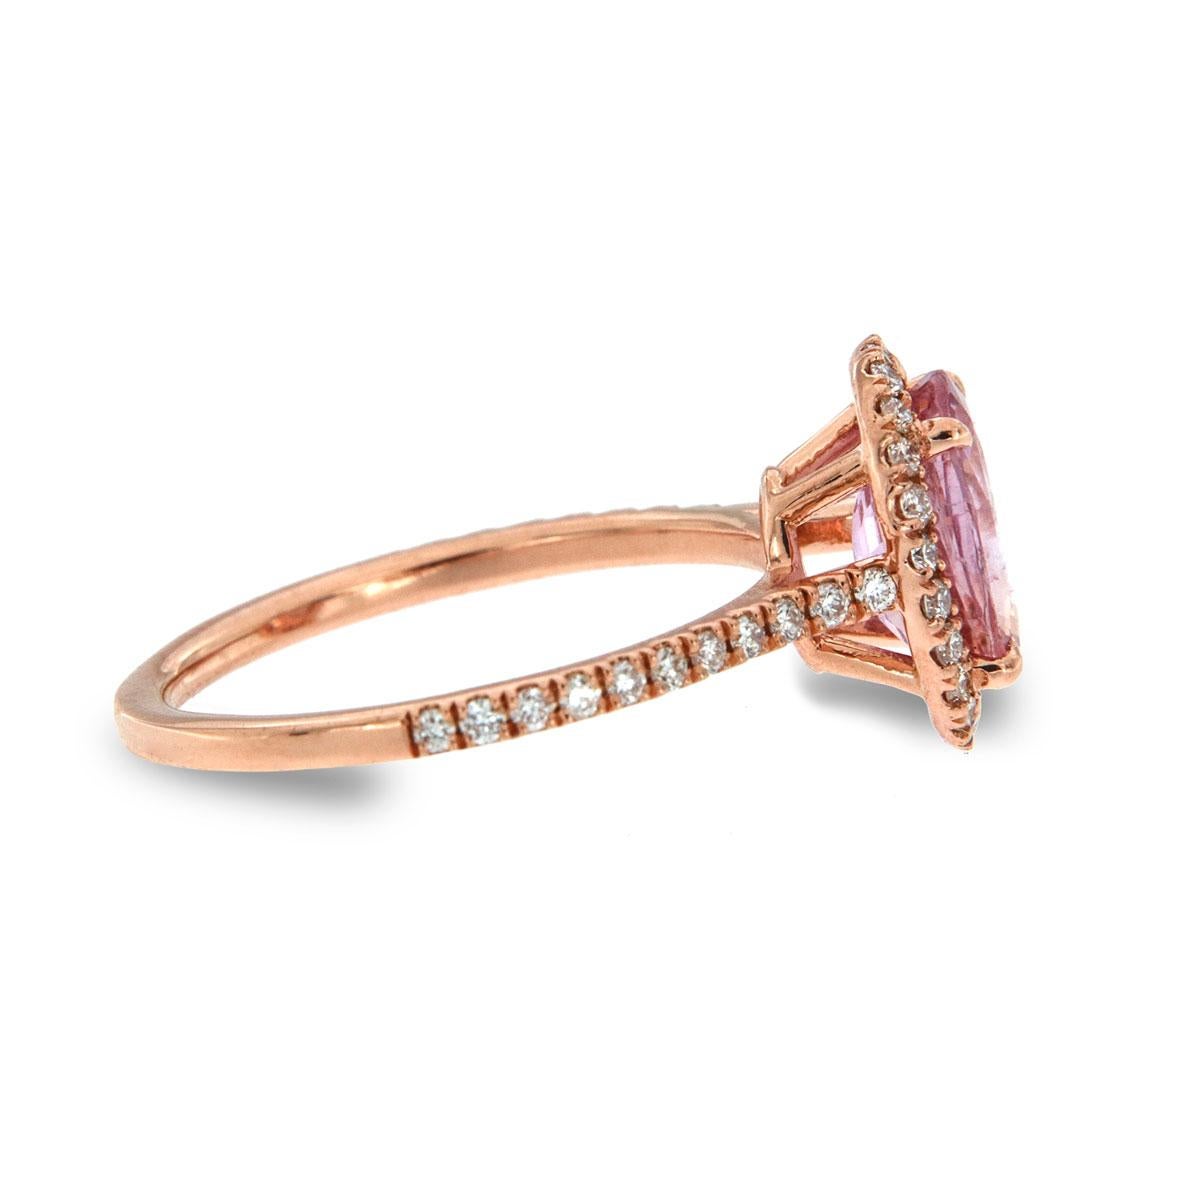 From our signature Gemstones collection of exquisite red carpet pieces, this handcrafted 18k Rose gold ring is centering a Top Quality Oval shape 2.11 Carat Sri-Lankan Pink Sapphire GIA Certificate: 2201148737 in premium luster encircled by a halo